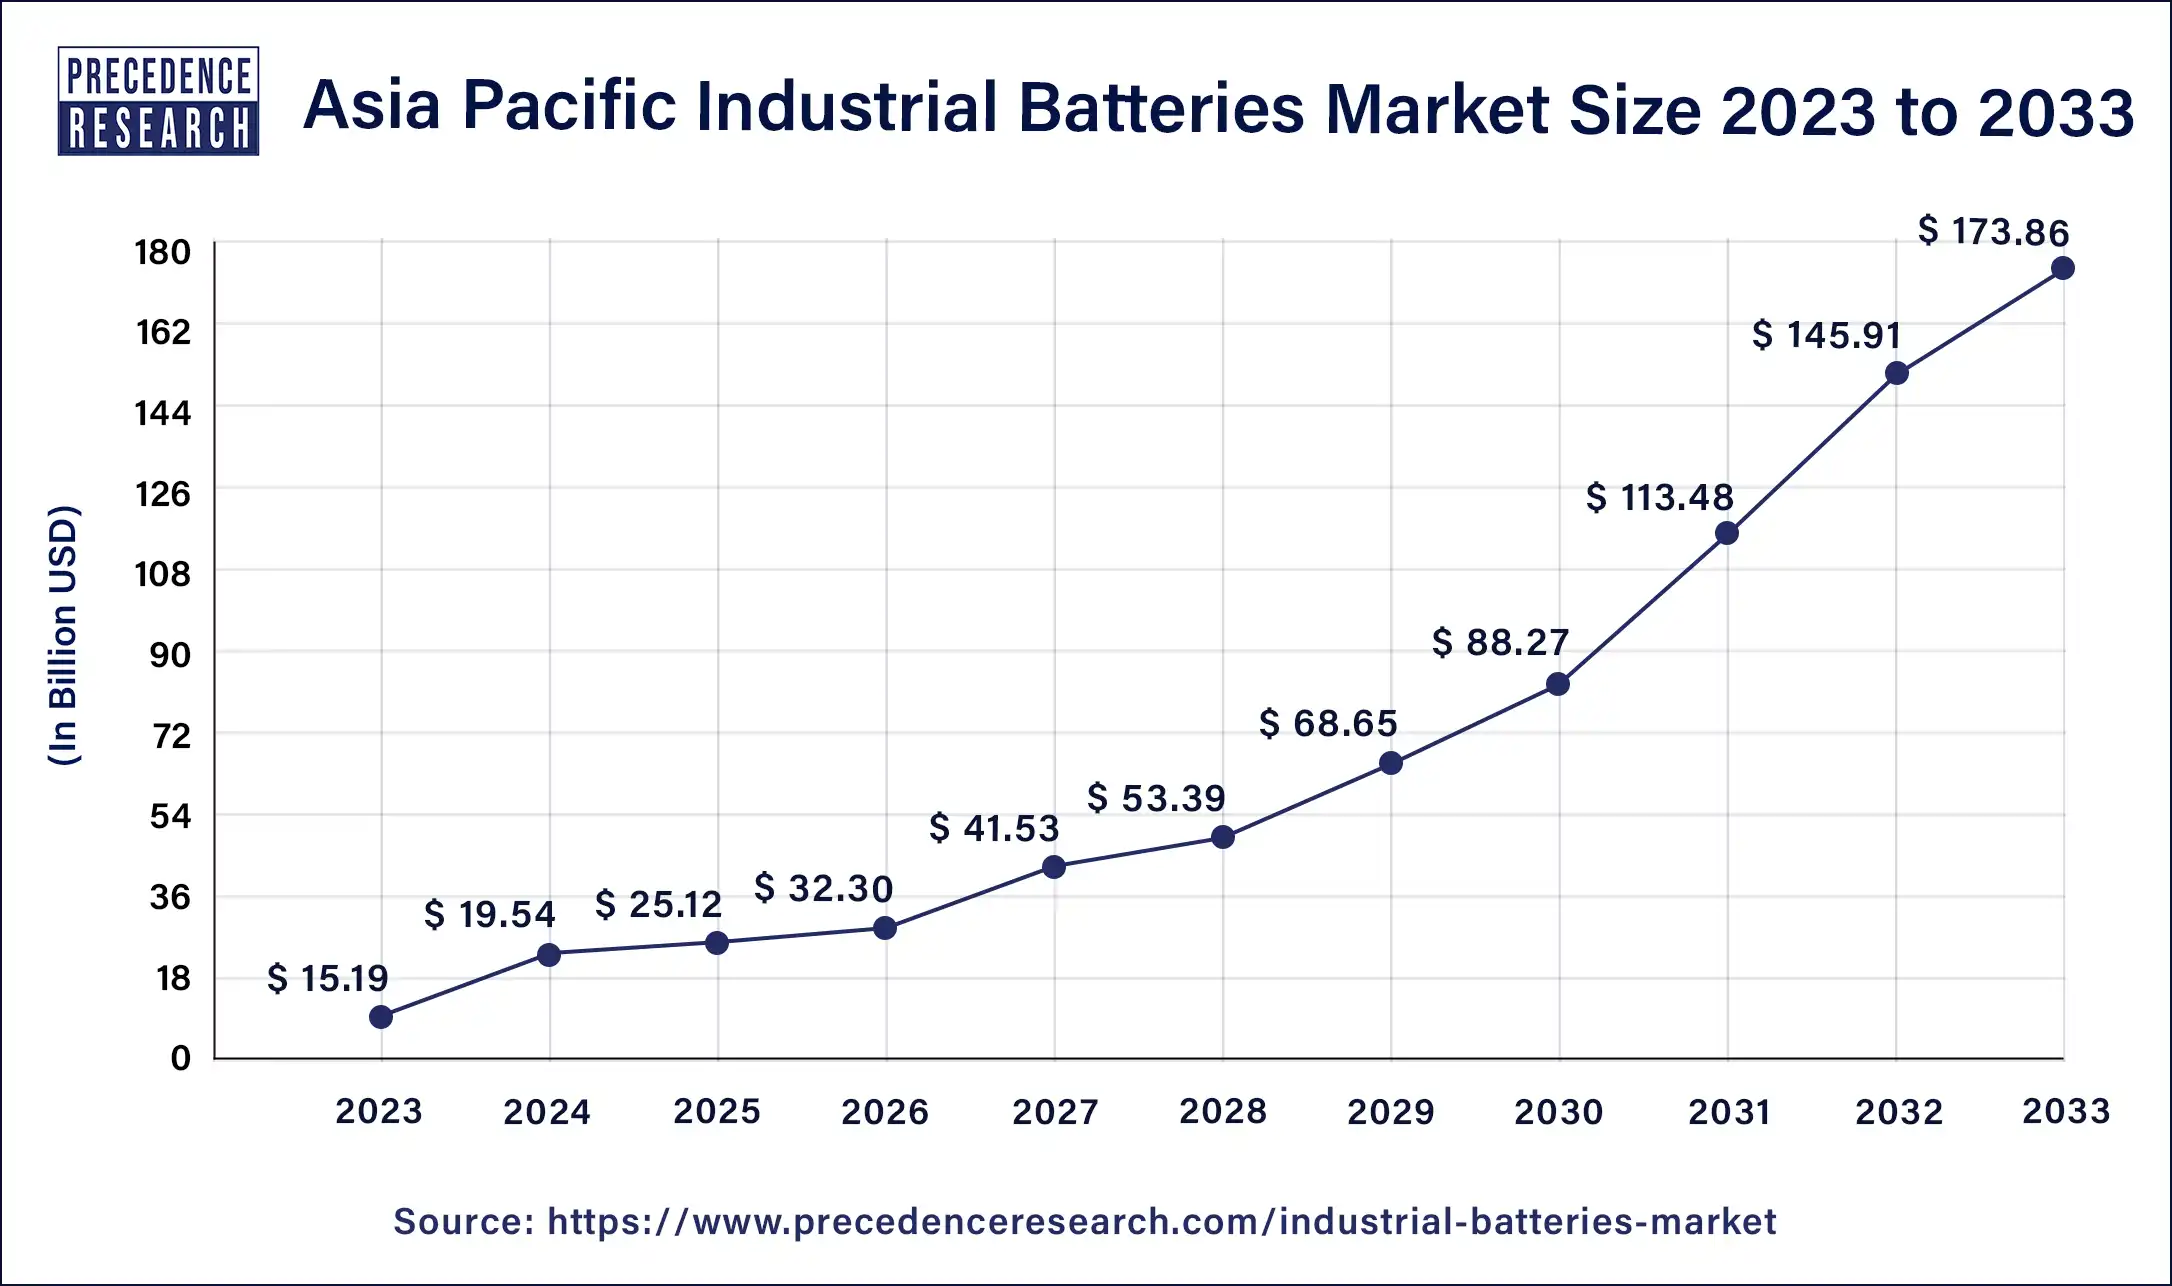 Asia Pacific Industrial Batteries Market Size 2024 to 2033